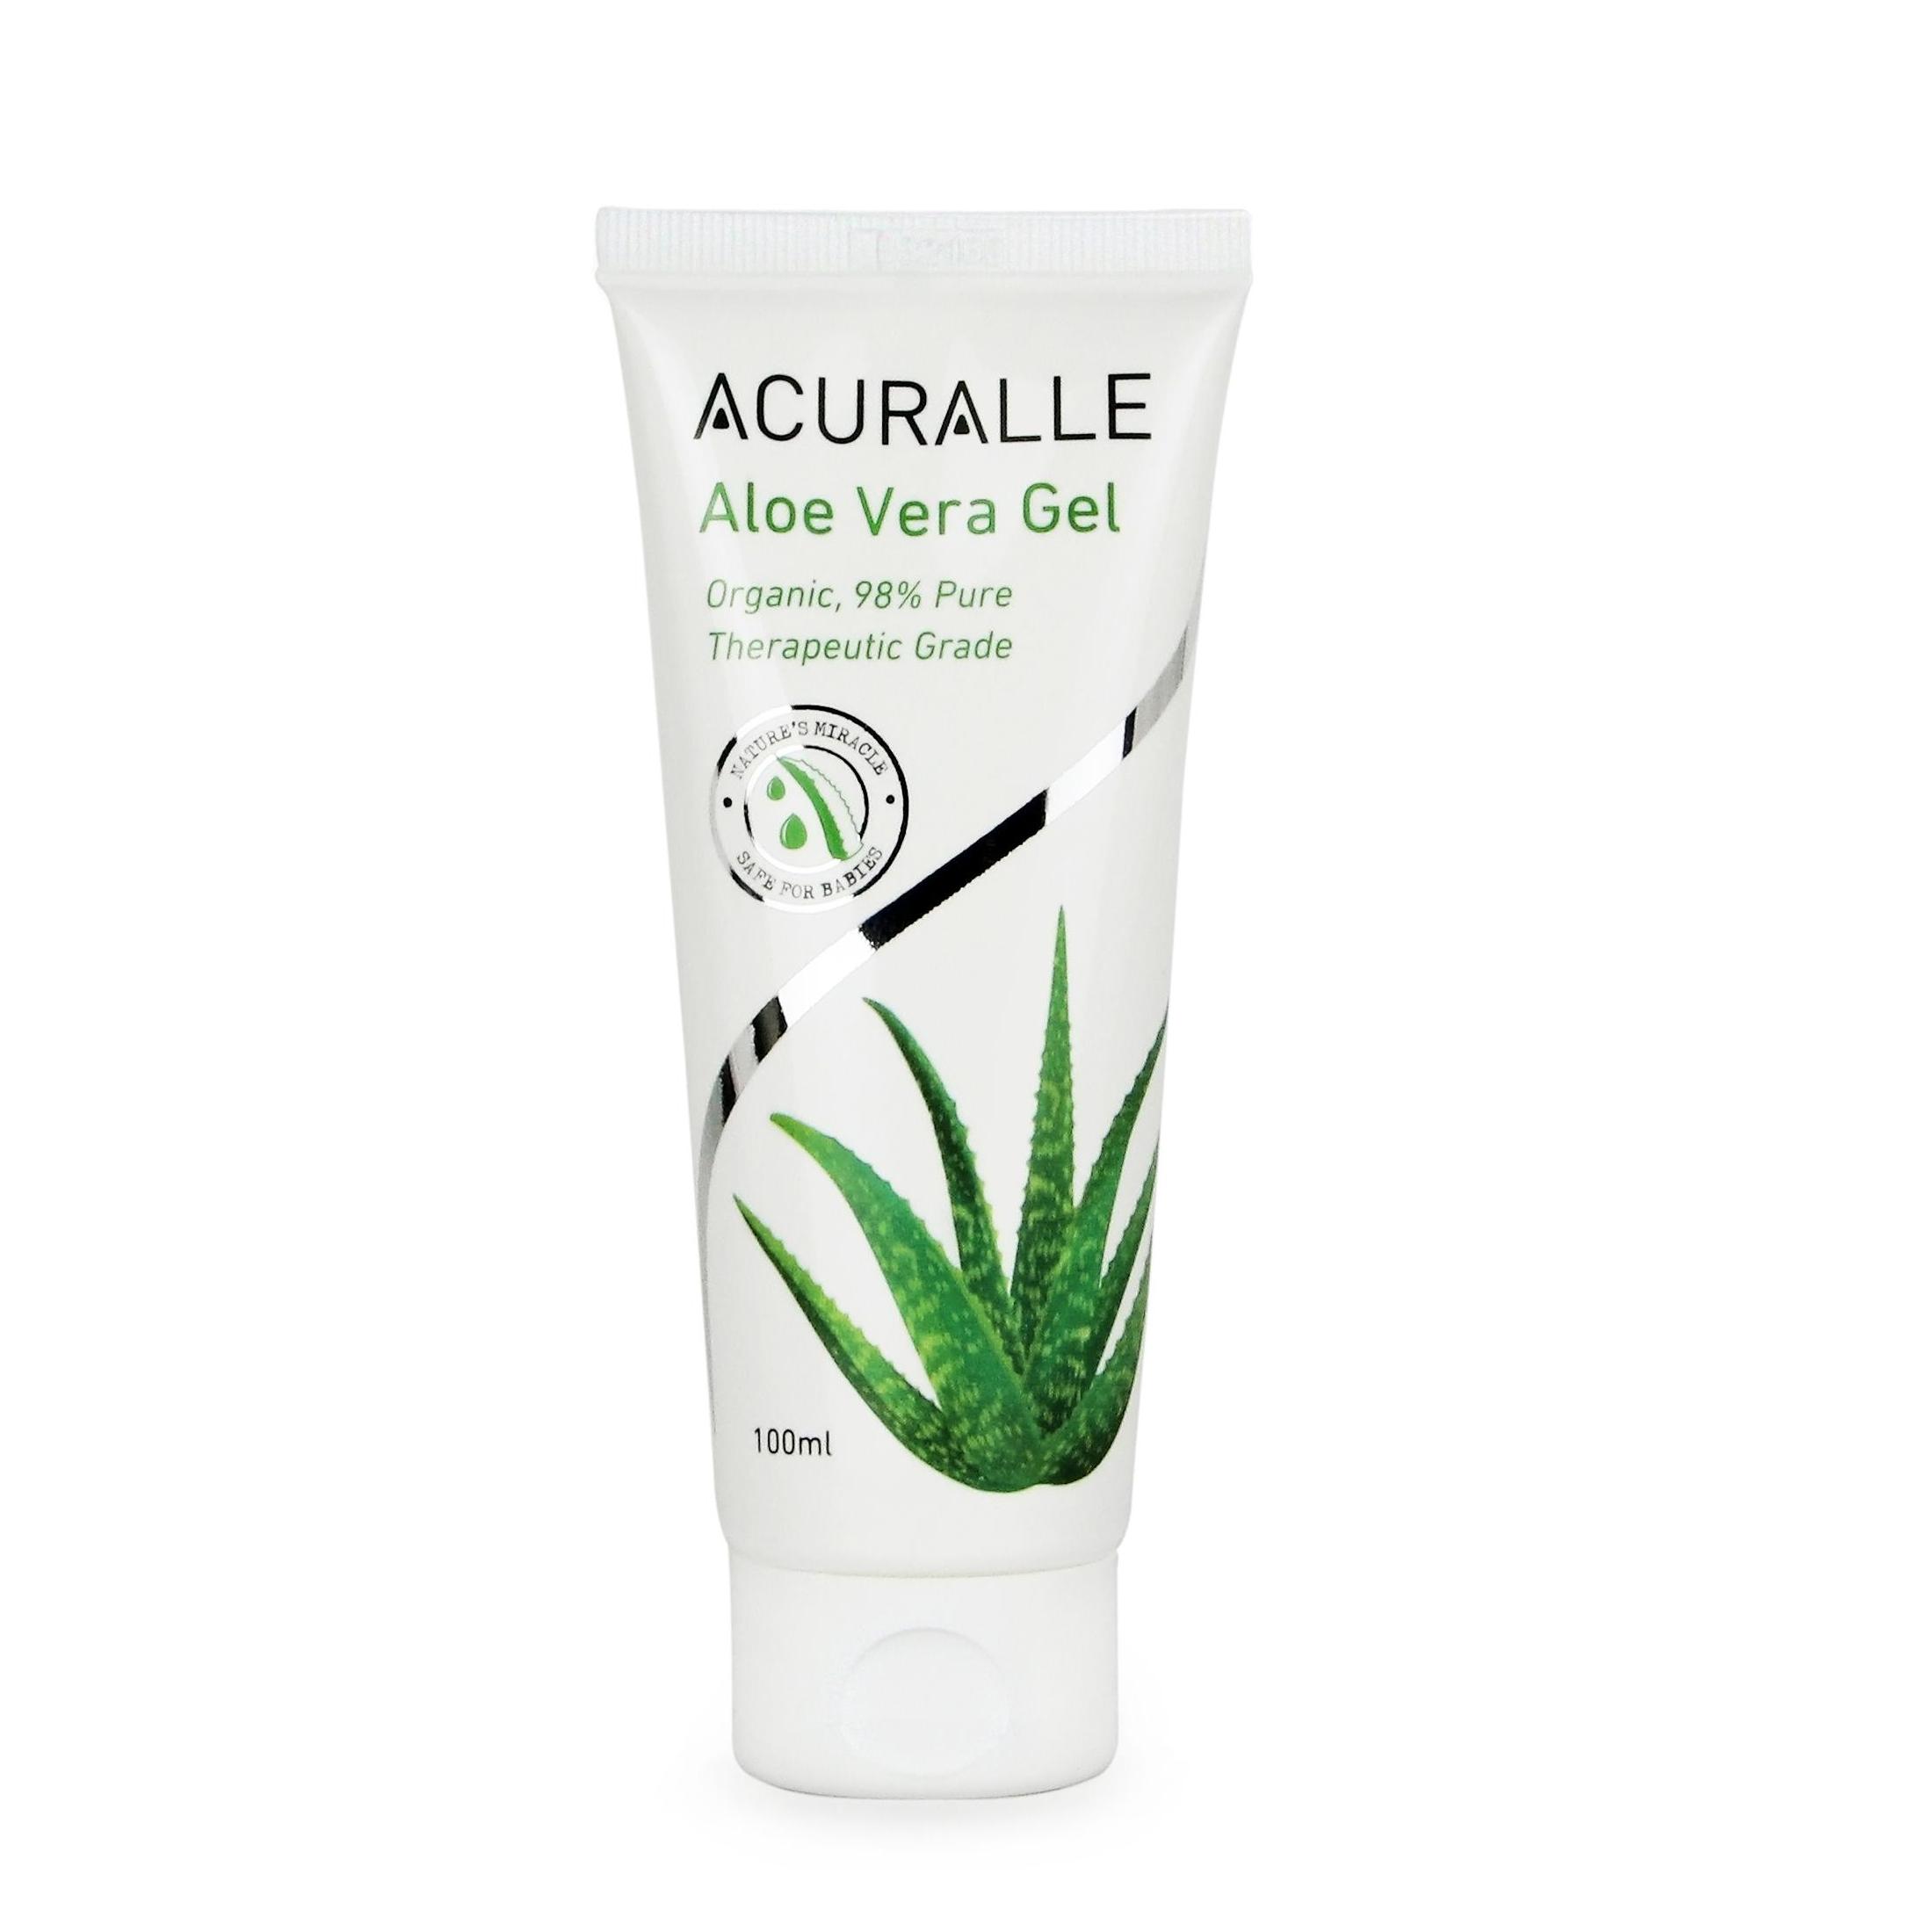 Acuralle Buy Acuralle At Best Price In Singapore Www Lazada Sg